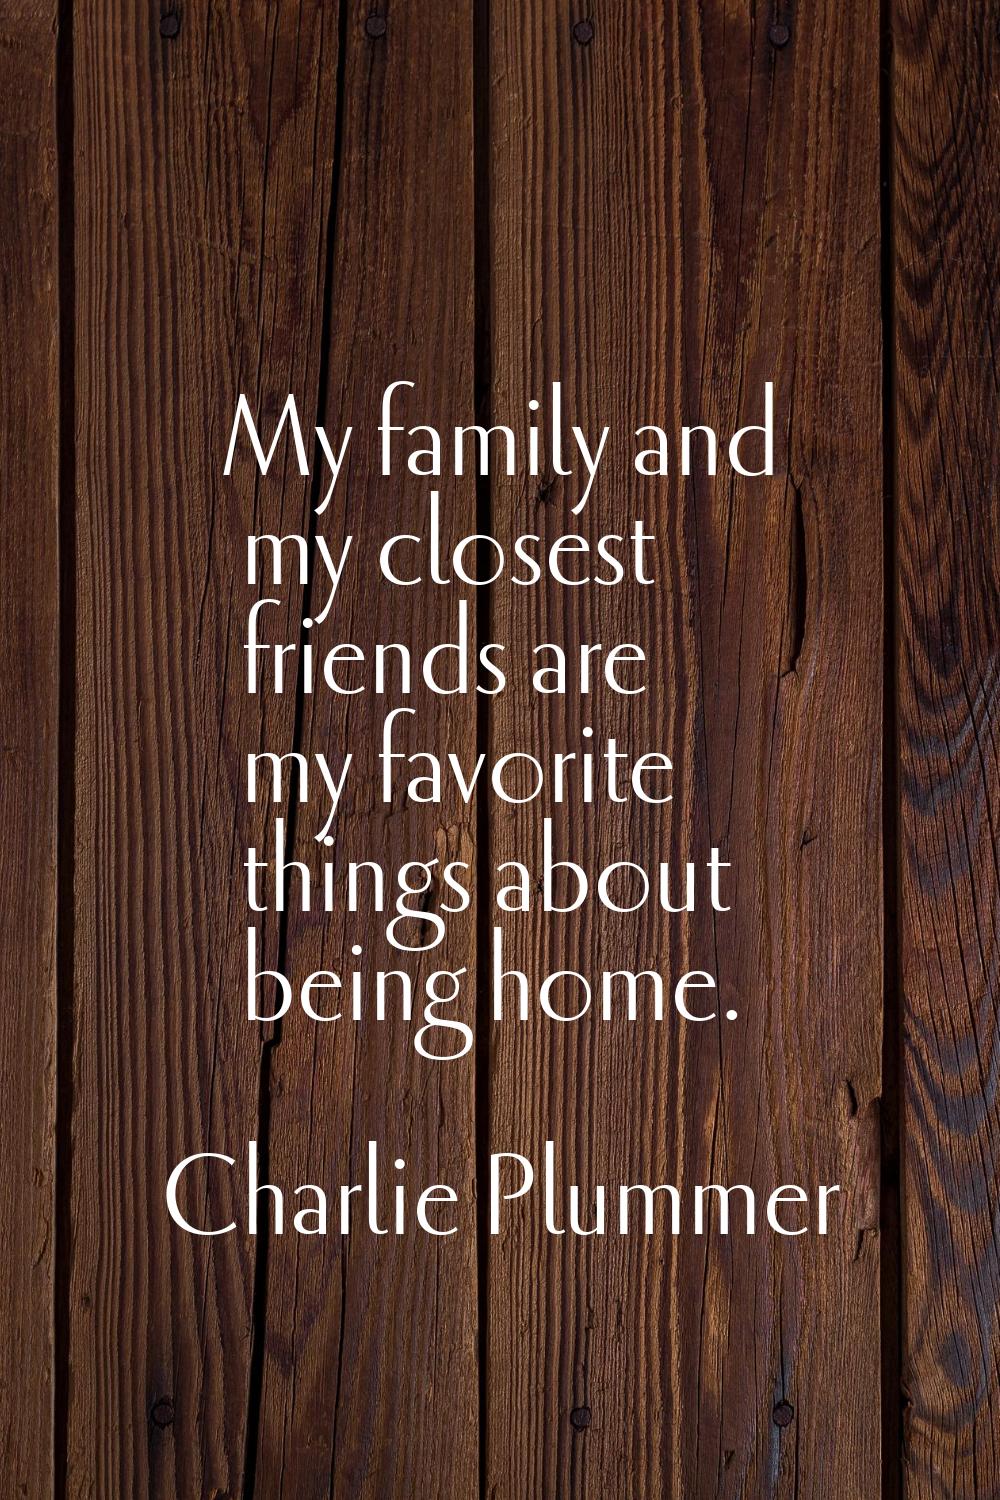 My family and my closest friends are my favorite things about being home.